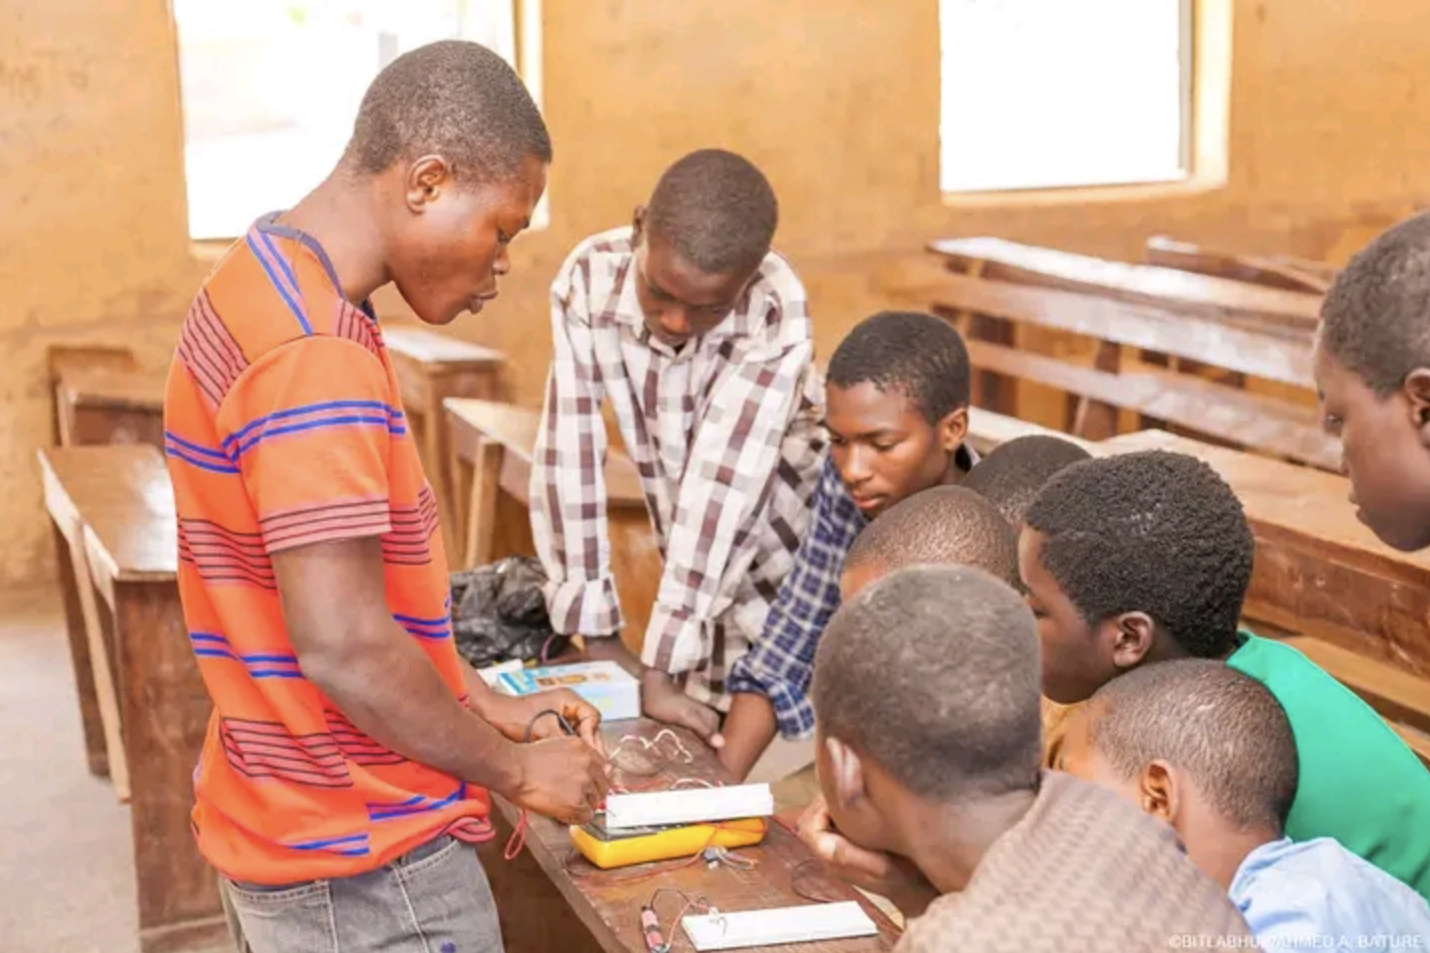 BitLab Innovation Hub is influencing STEM education among out-of-school children in Taraba